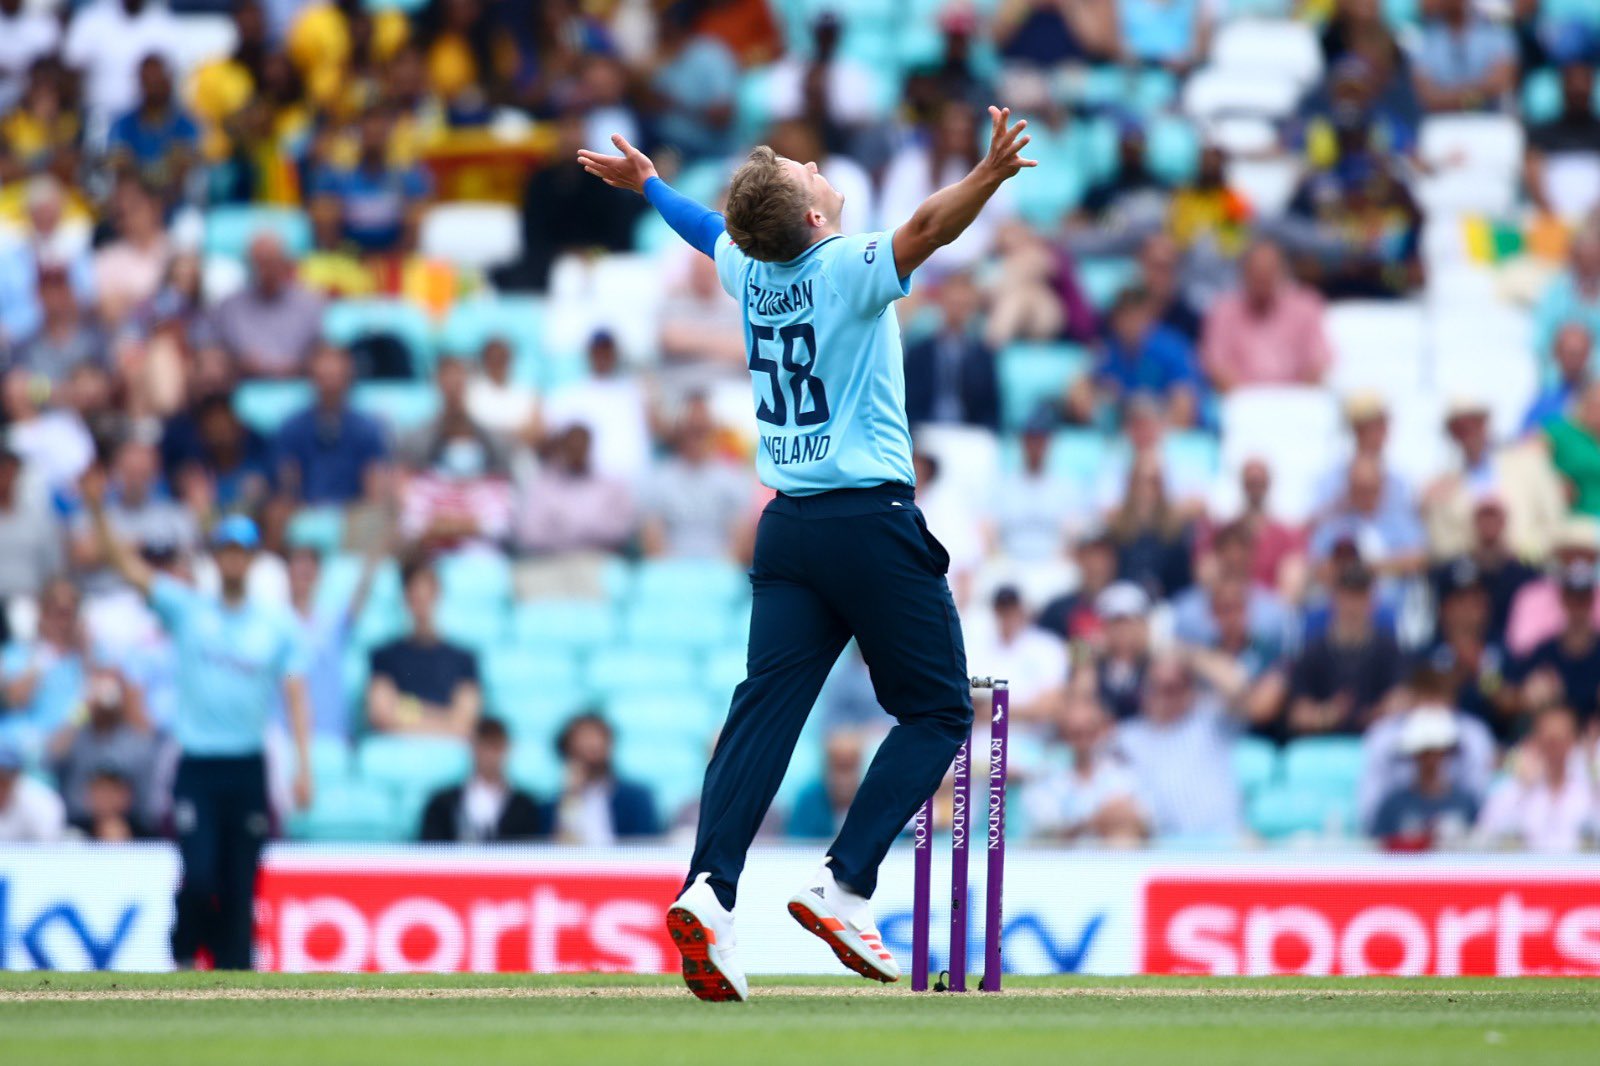 ENG vs SL | Playing in the IPL has helped Sam Curran thrive for England, claims Graham Thorpe